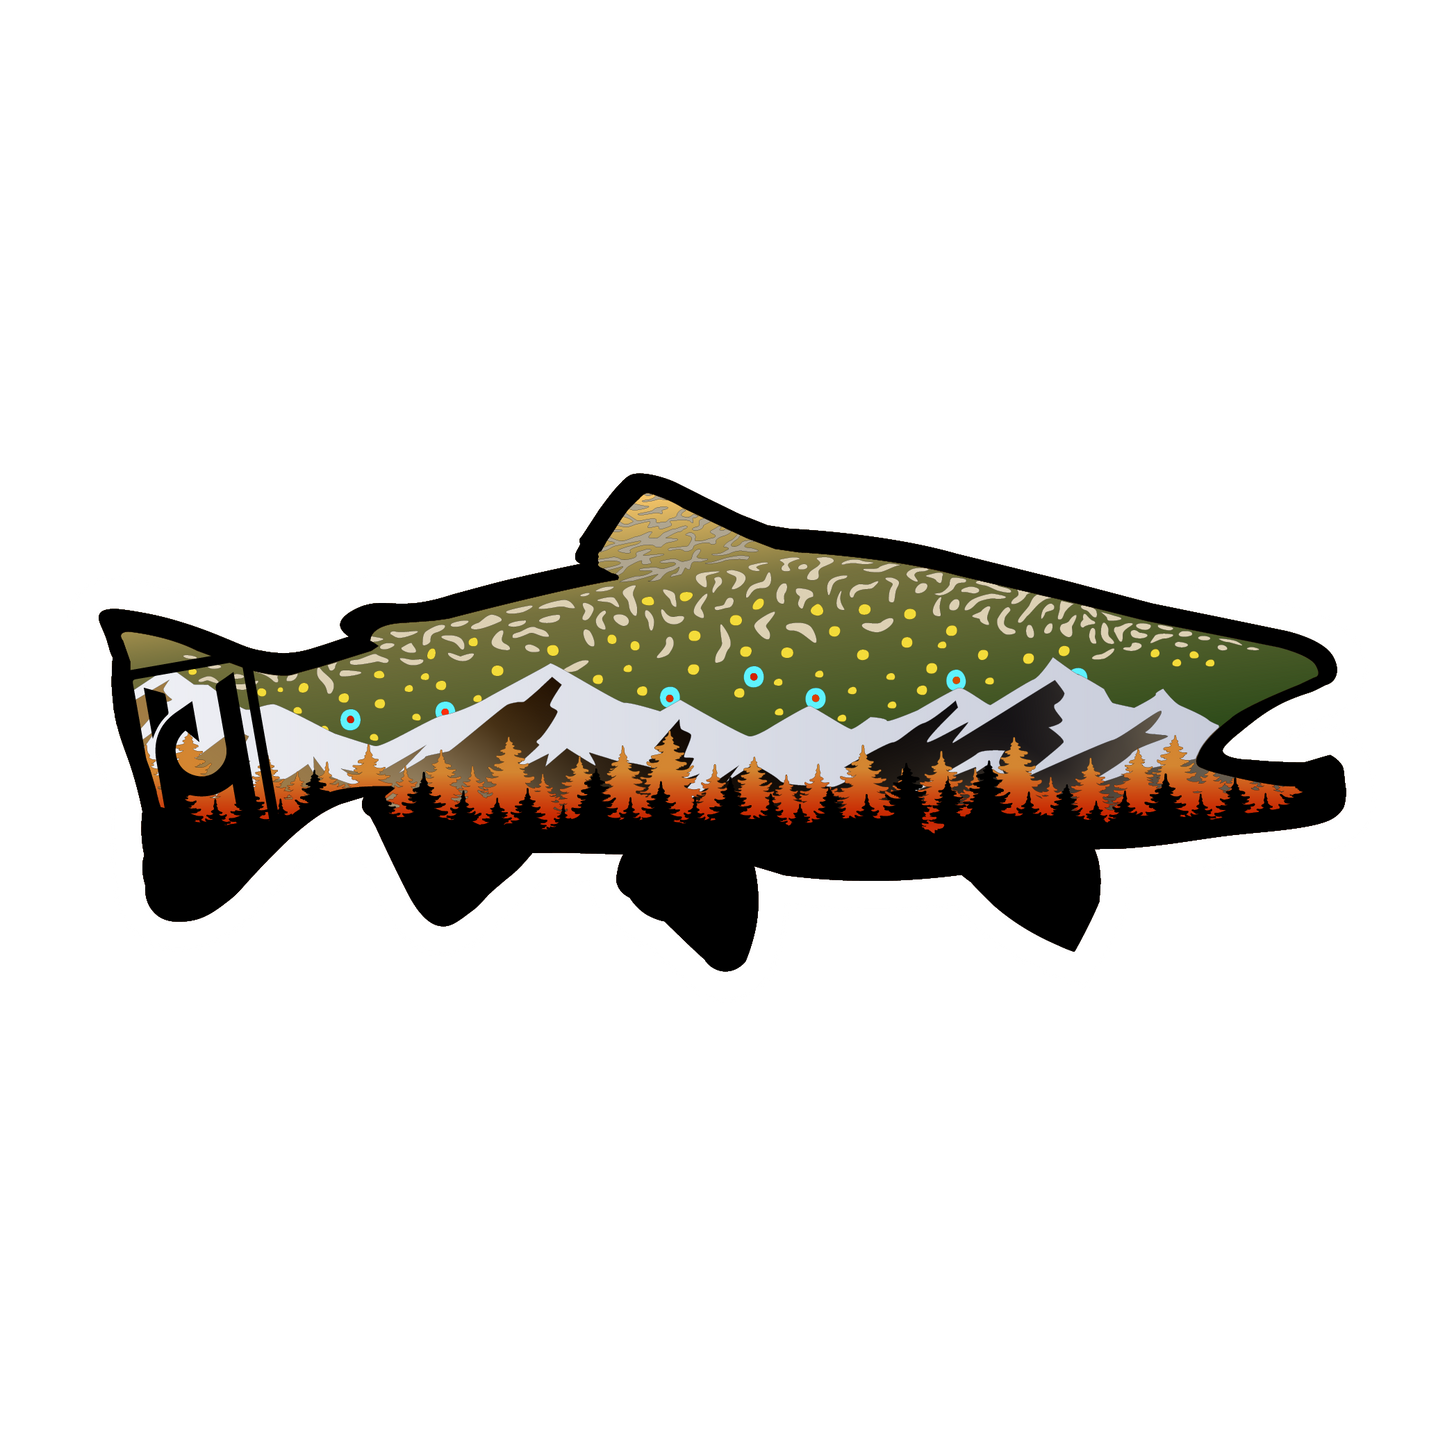 Brook Trout sticker modeled after our wood art! Features the beautiful colors of the brook trout along with mountain and pine tree accents. 